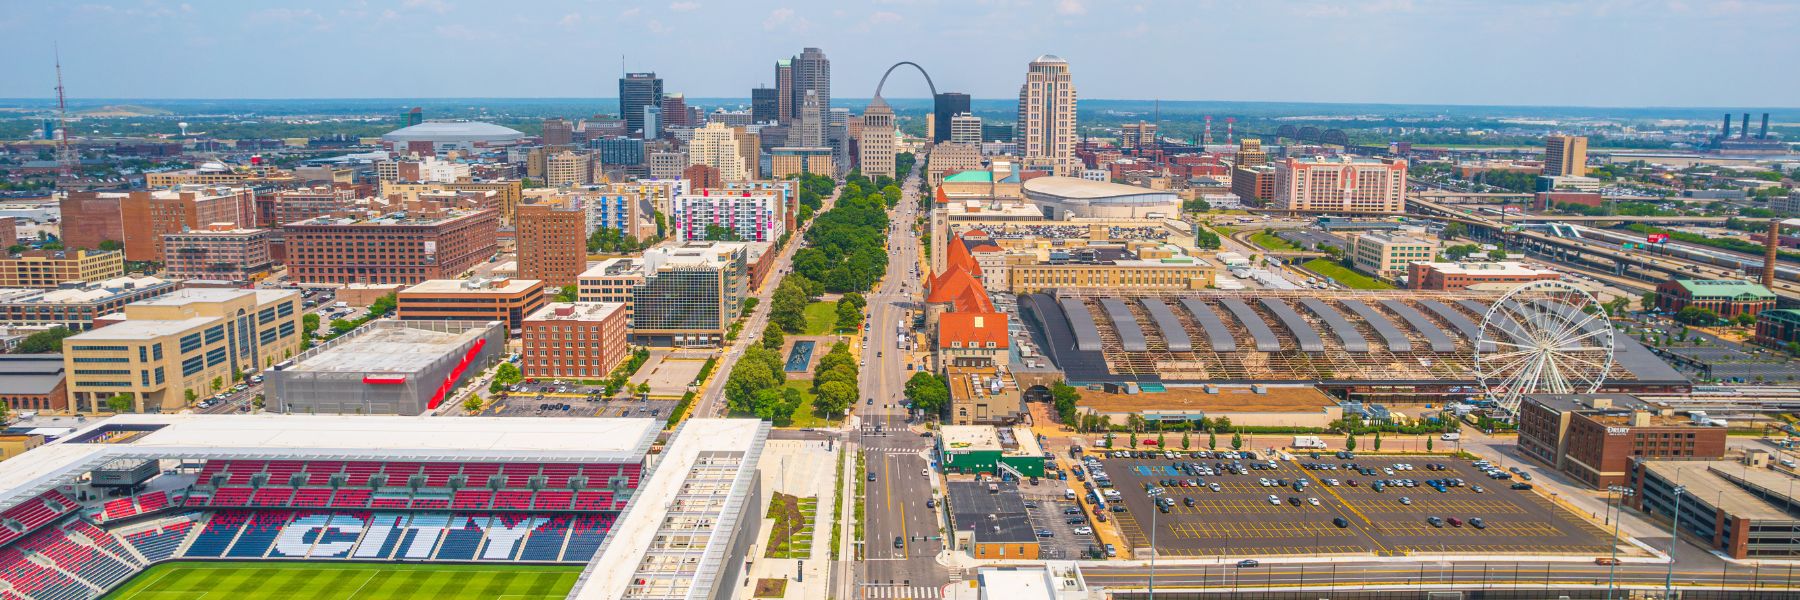 The St. Louis skyline features CITYPARK, Union Station and the Gateway Arch.